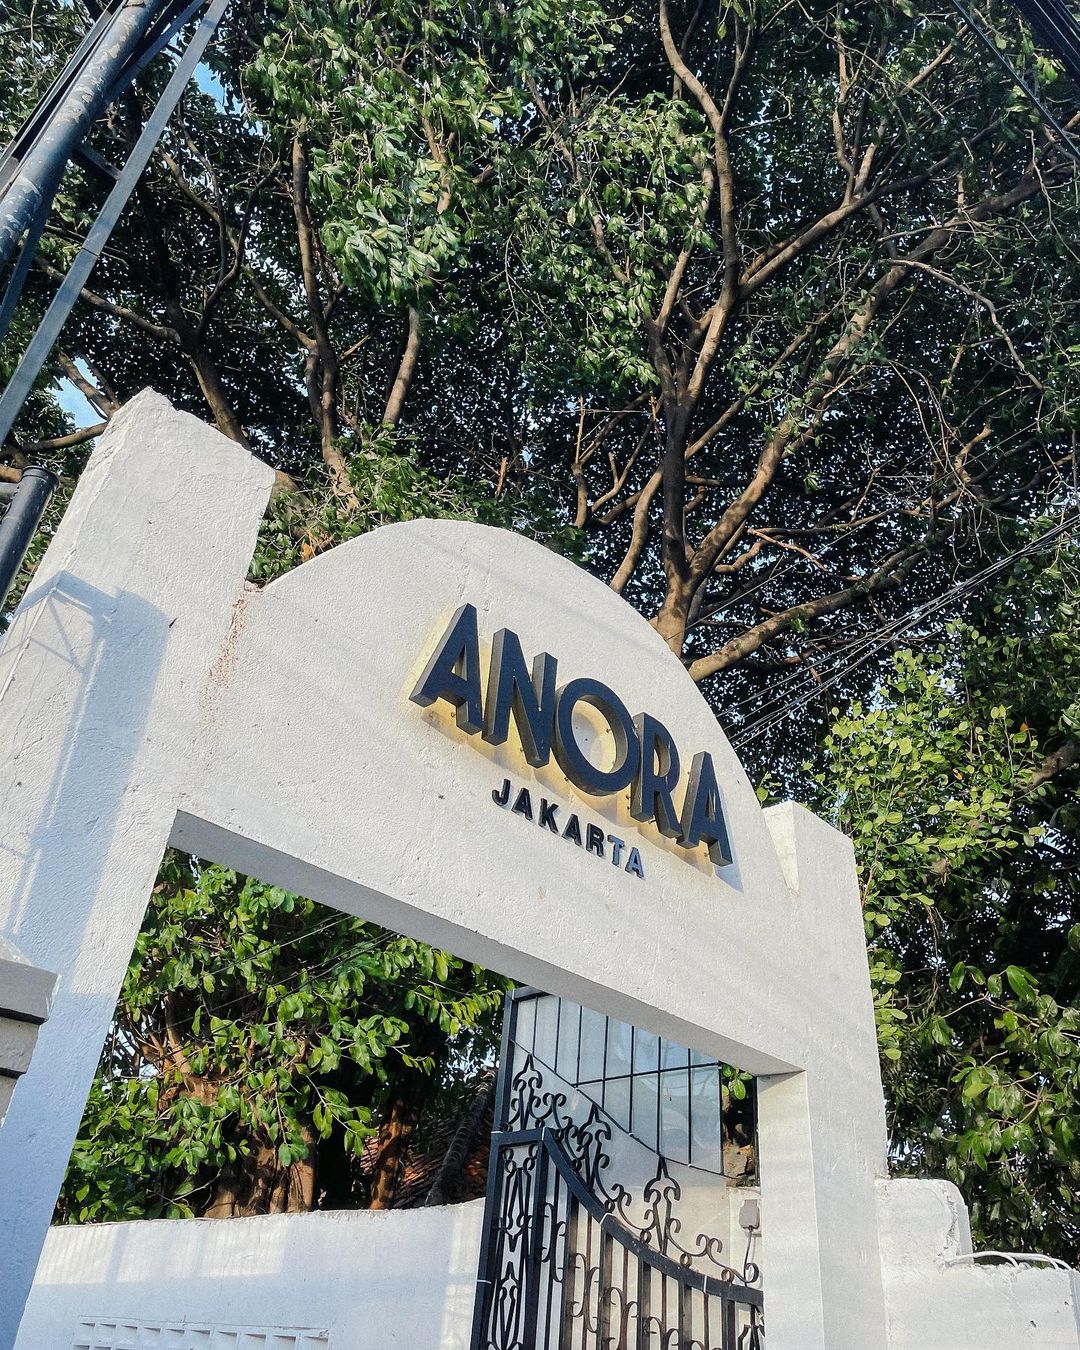 Review Anora Jakarta Image From @m_azriansyah